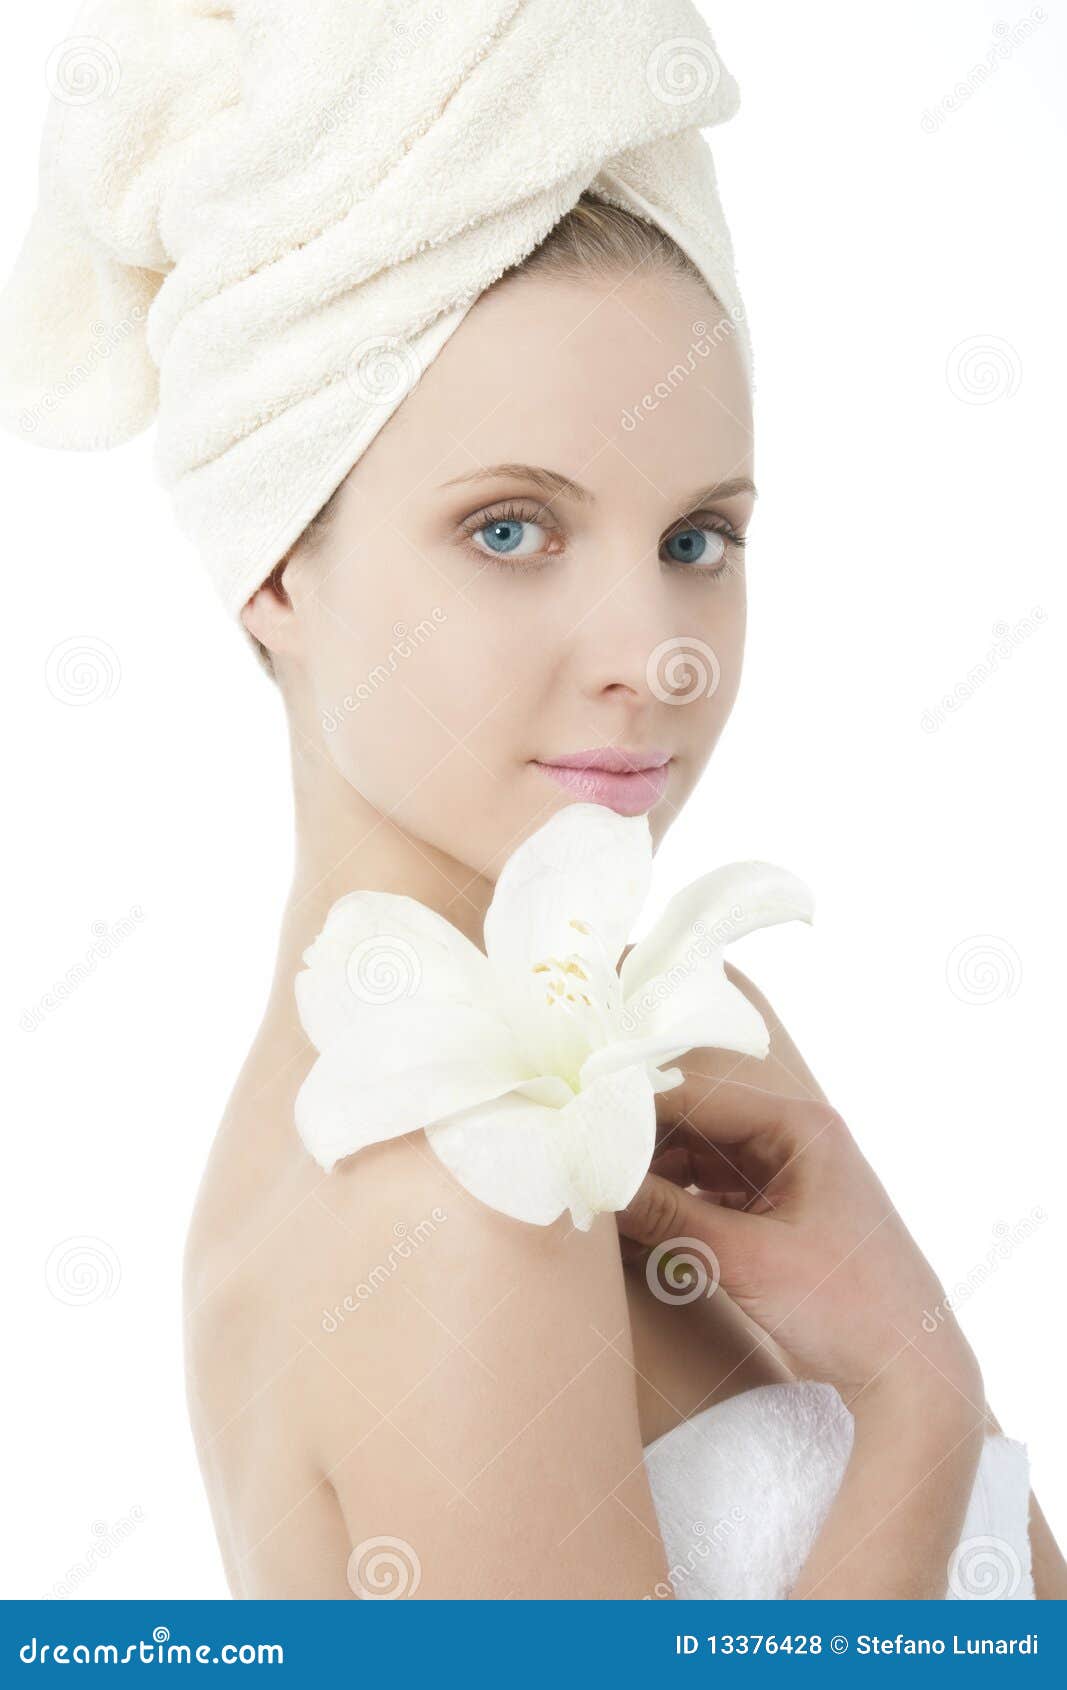 Beauty Wrapped In Towel Royalty Free Stock image pic